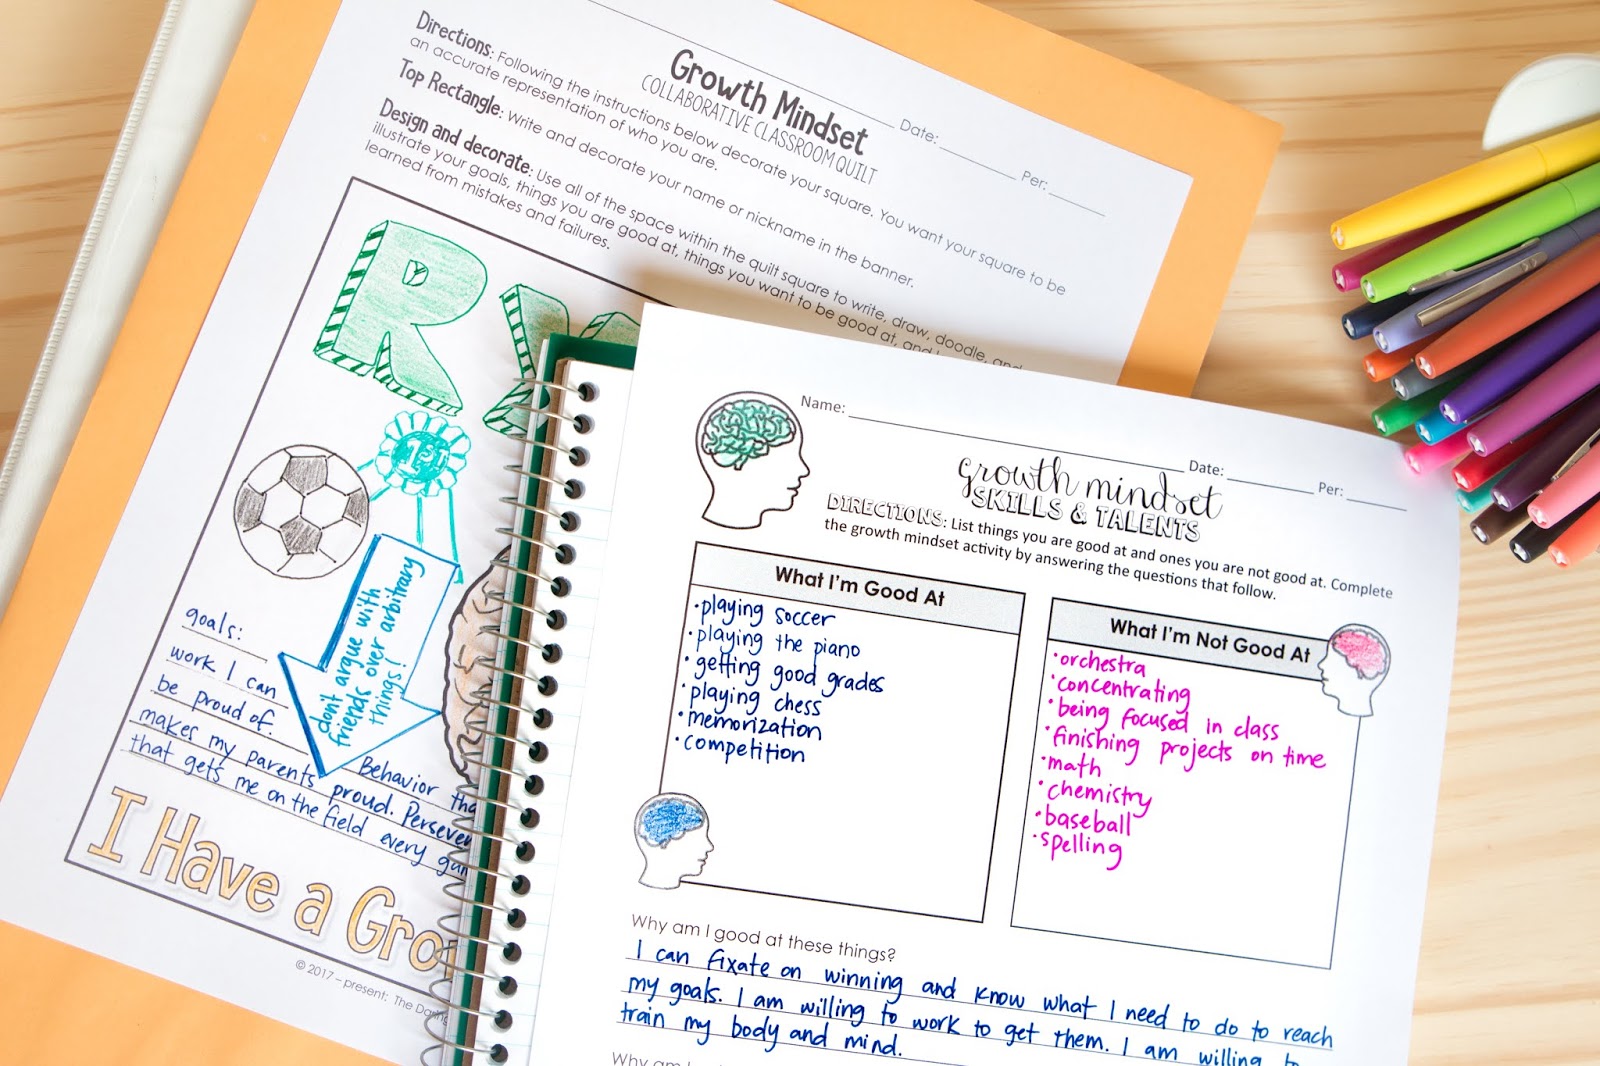 Creating a Growth Mindset in the Secondary Classroom | The Daring ...